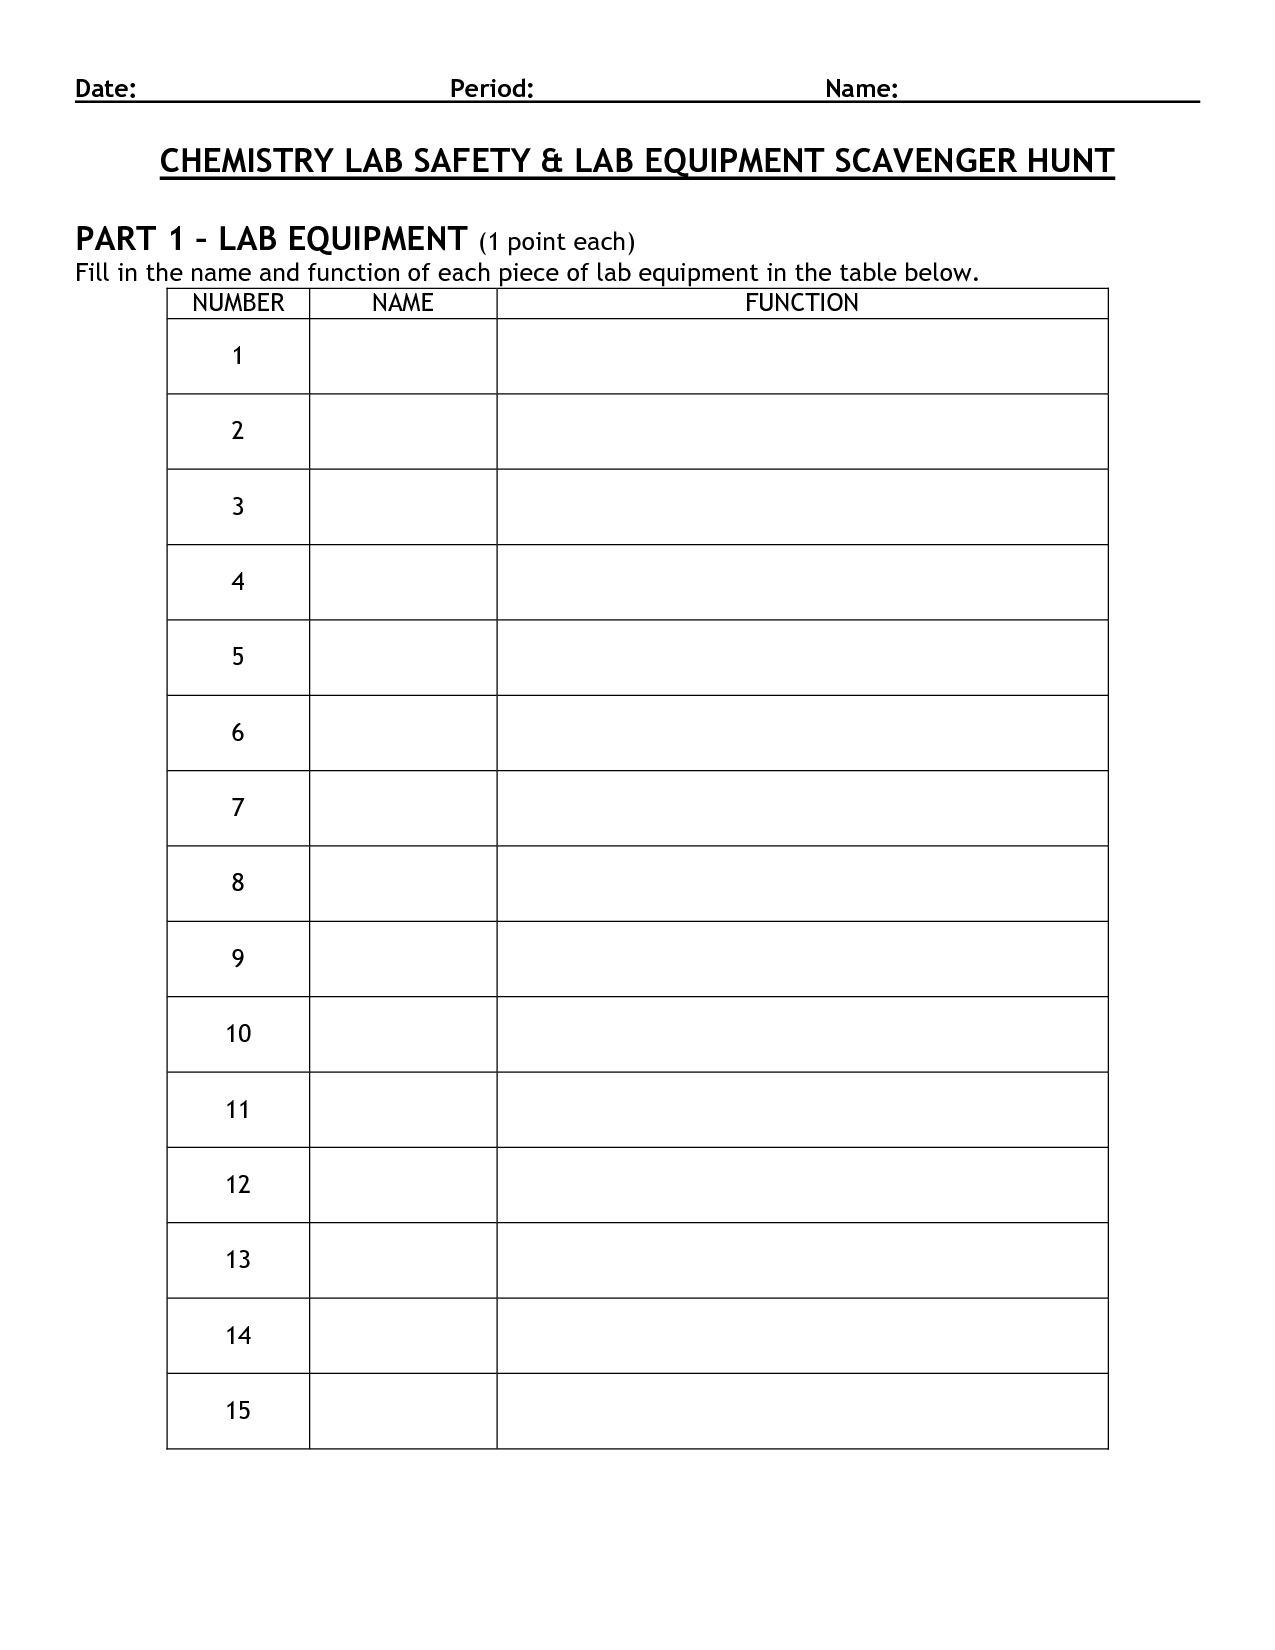 9 Best Images of Chemistry Lab Equipment Worksheet - Science Lab